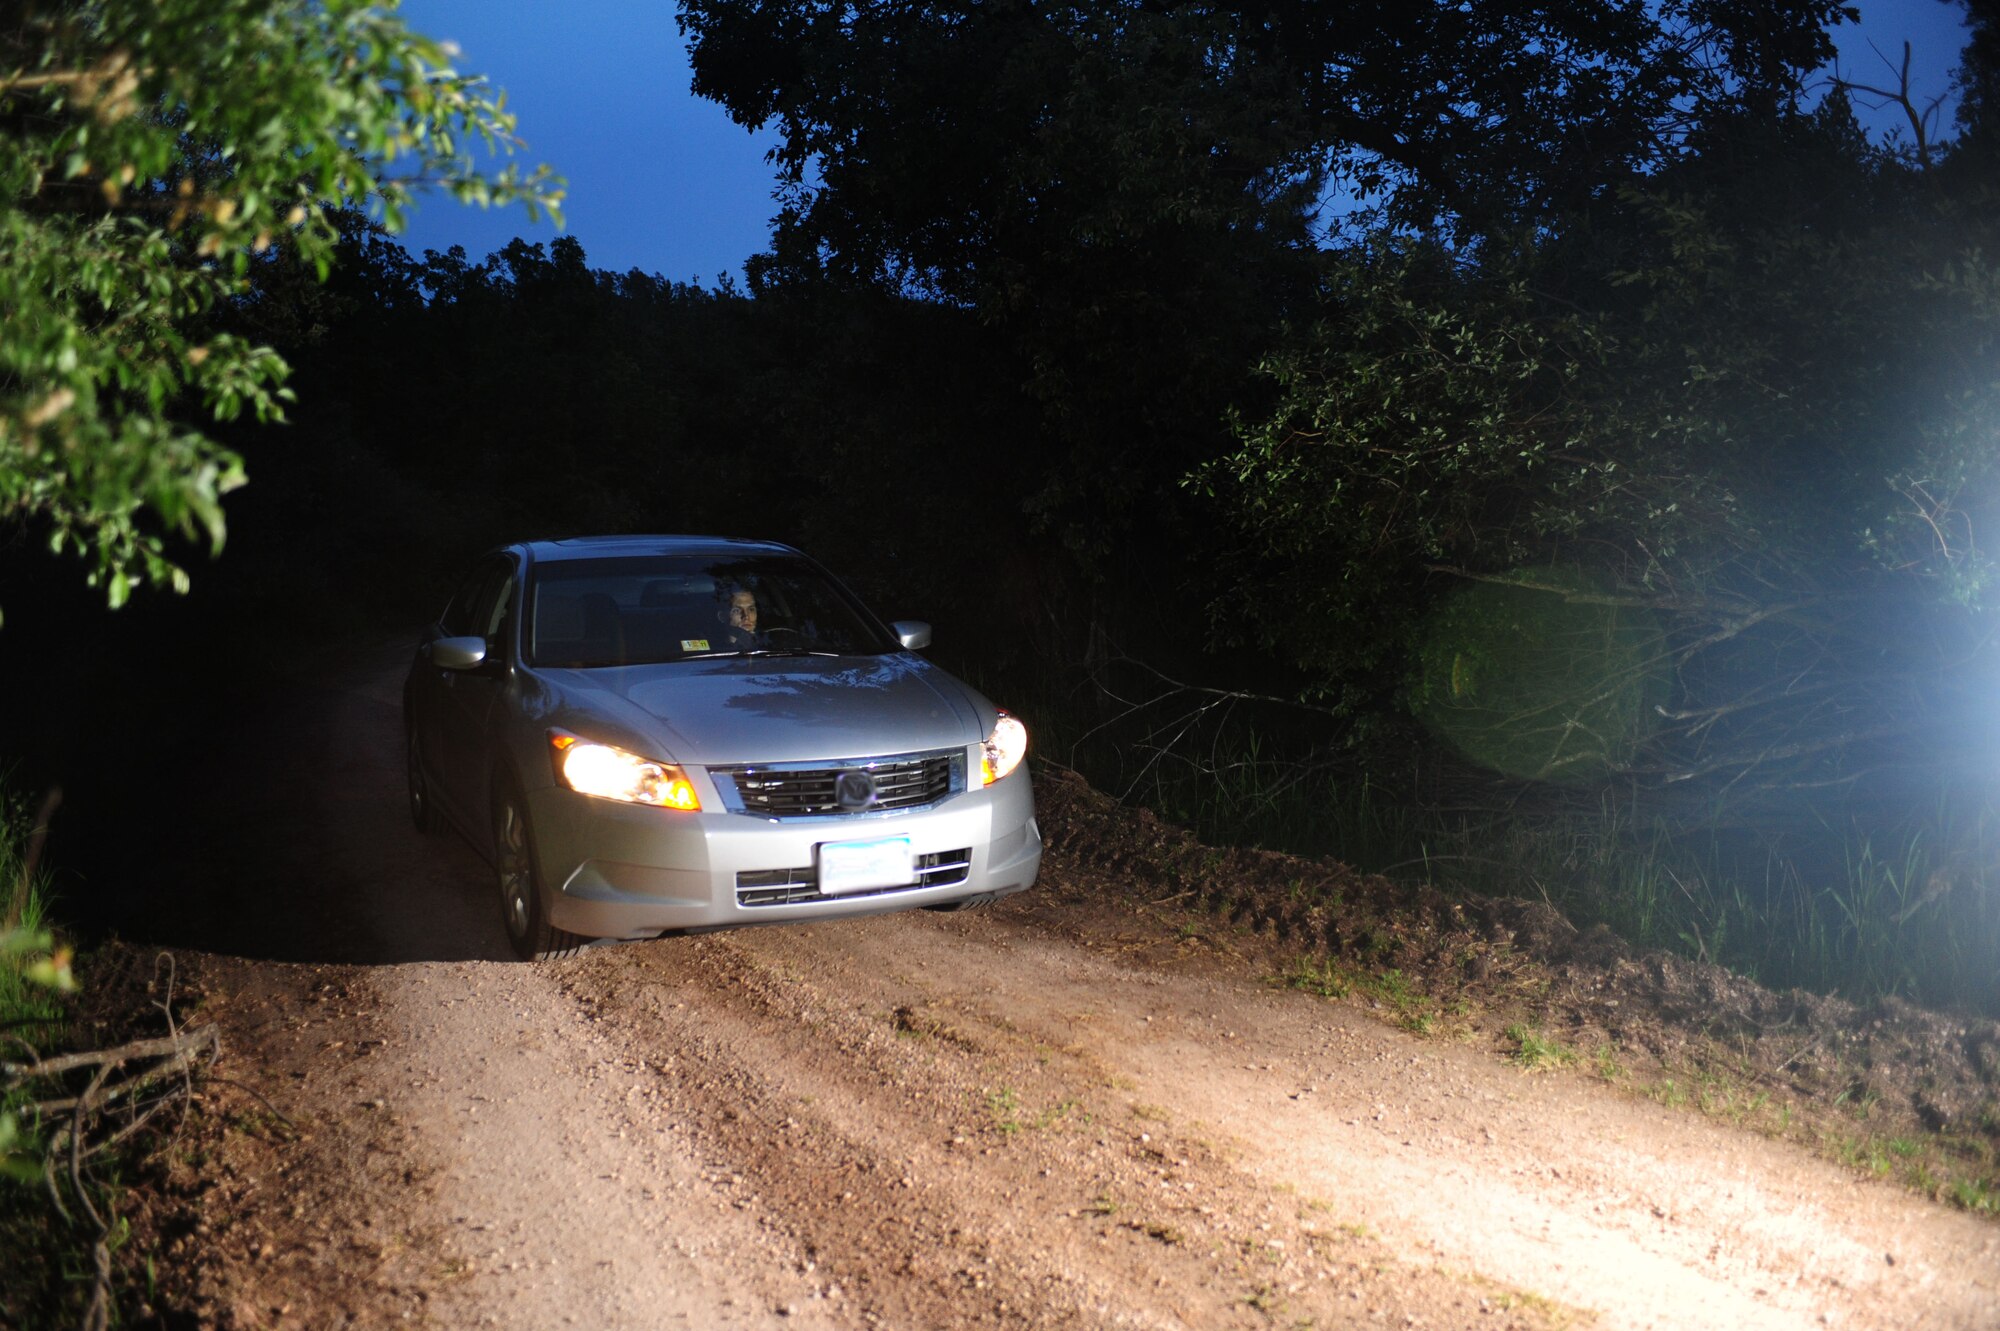 ELLSWORTH AIR FORCE BASE, S.D. -- Senior Airman David Carter, 28th Maintenance Squadron aerospace ground equipment journeyman, drives down a winding dirt road the night of June 23.  It’s important if taking long trips to drive safely as well as get adequate sleep before operating a vehicle. (U.S Air Force photo/Airman 1st Class Anthony Sanchelli)